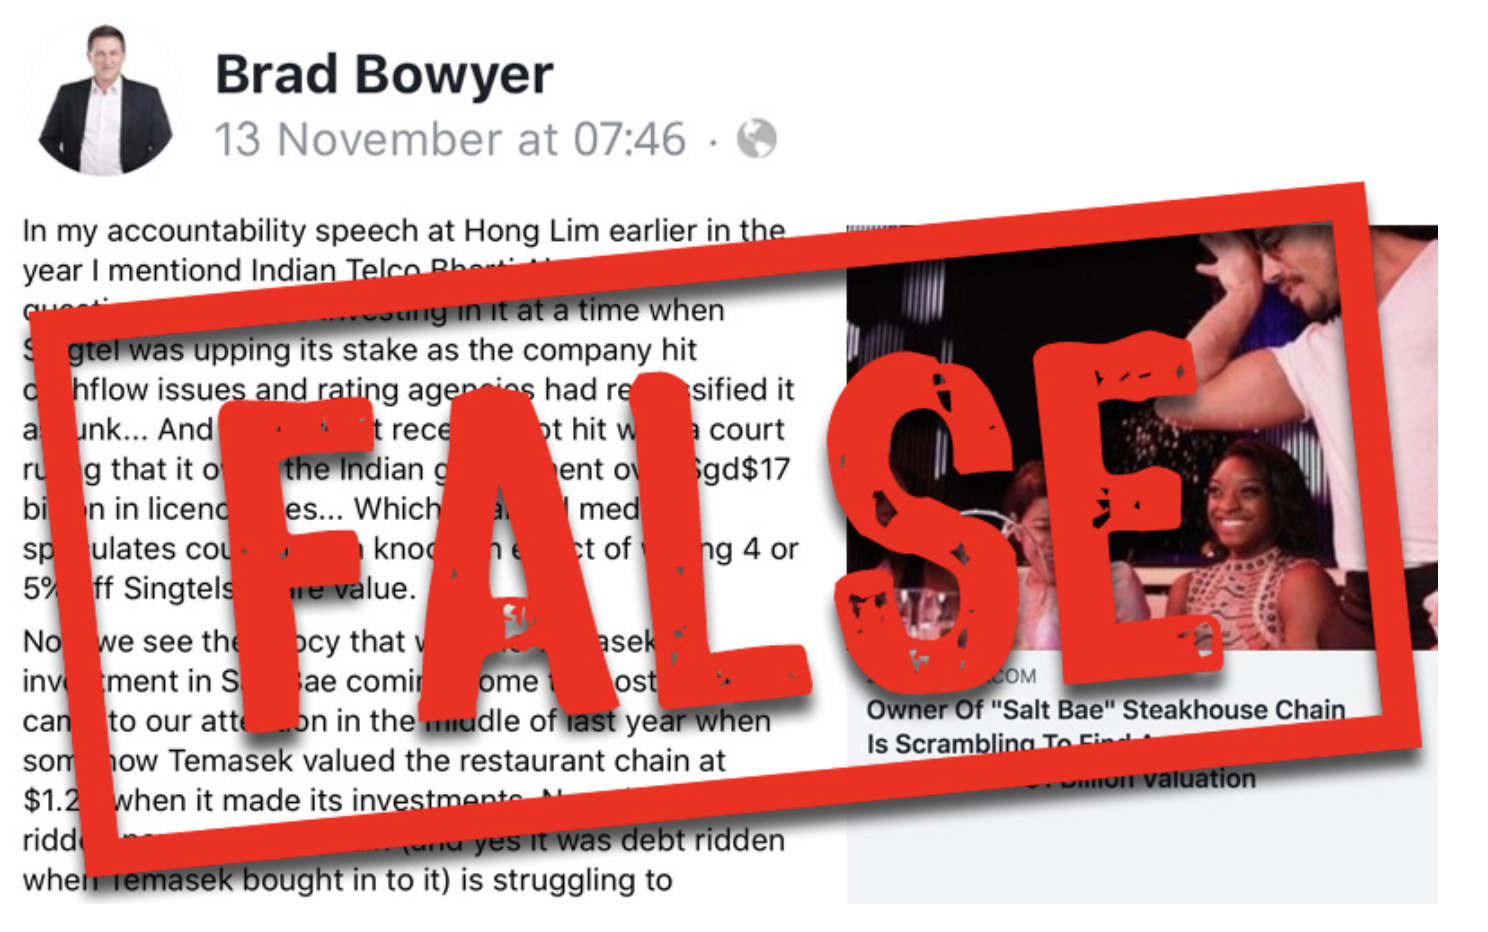 Screenshot of Brad Bowyer’s Facebook post with “FALSE” graphic by Gov.Sg.